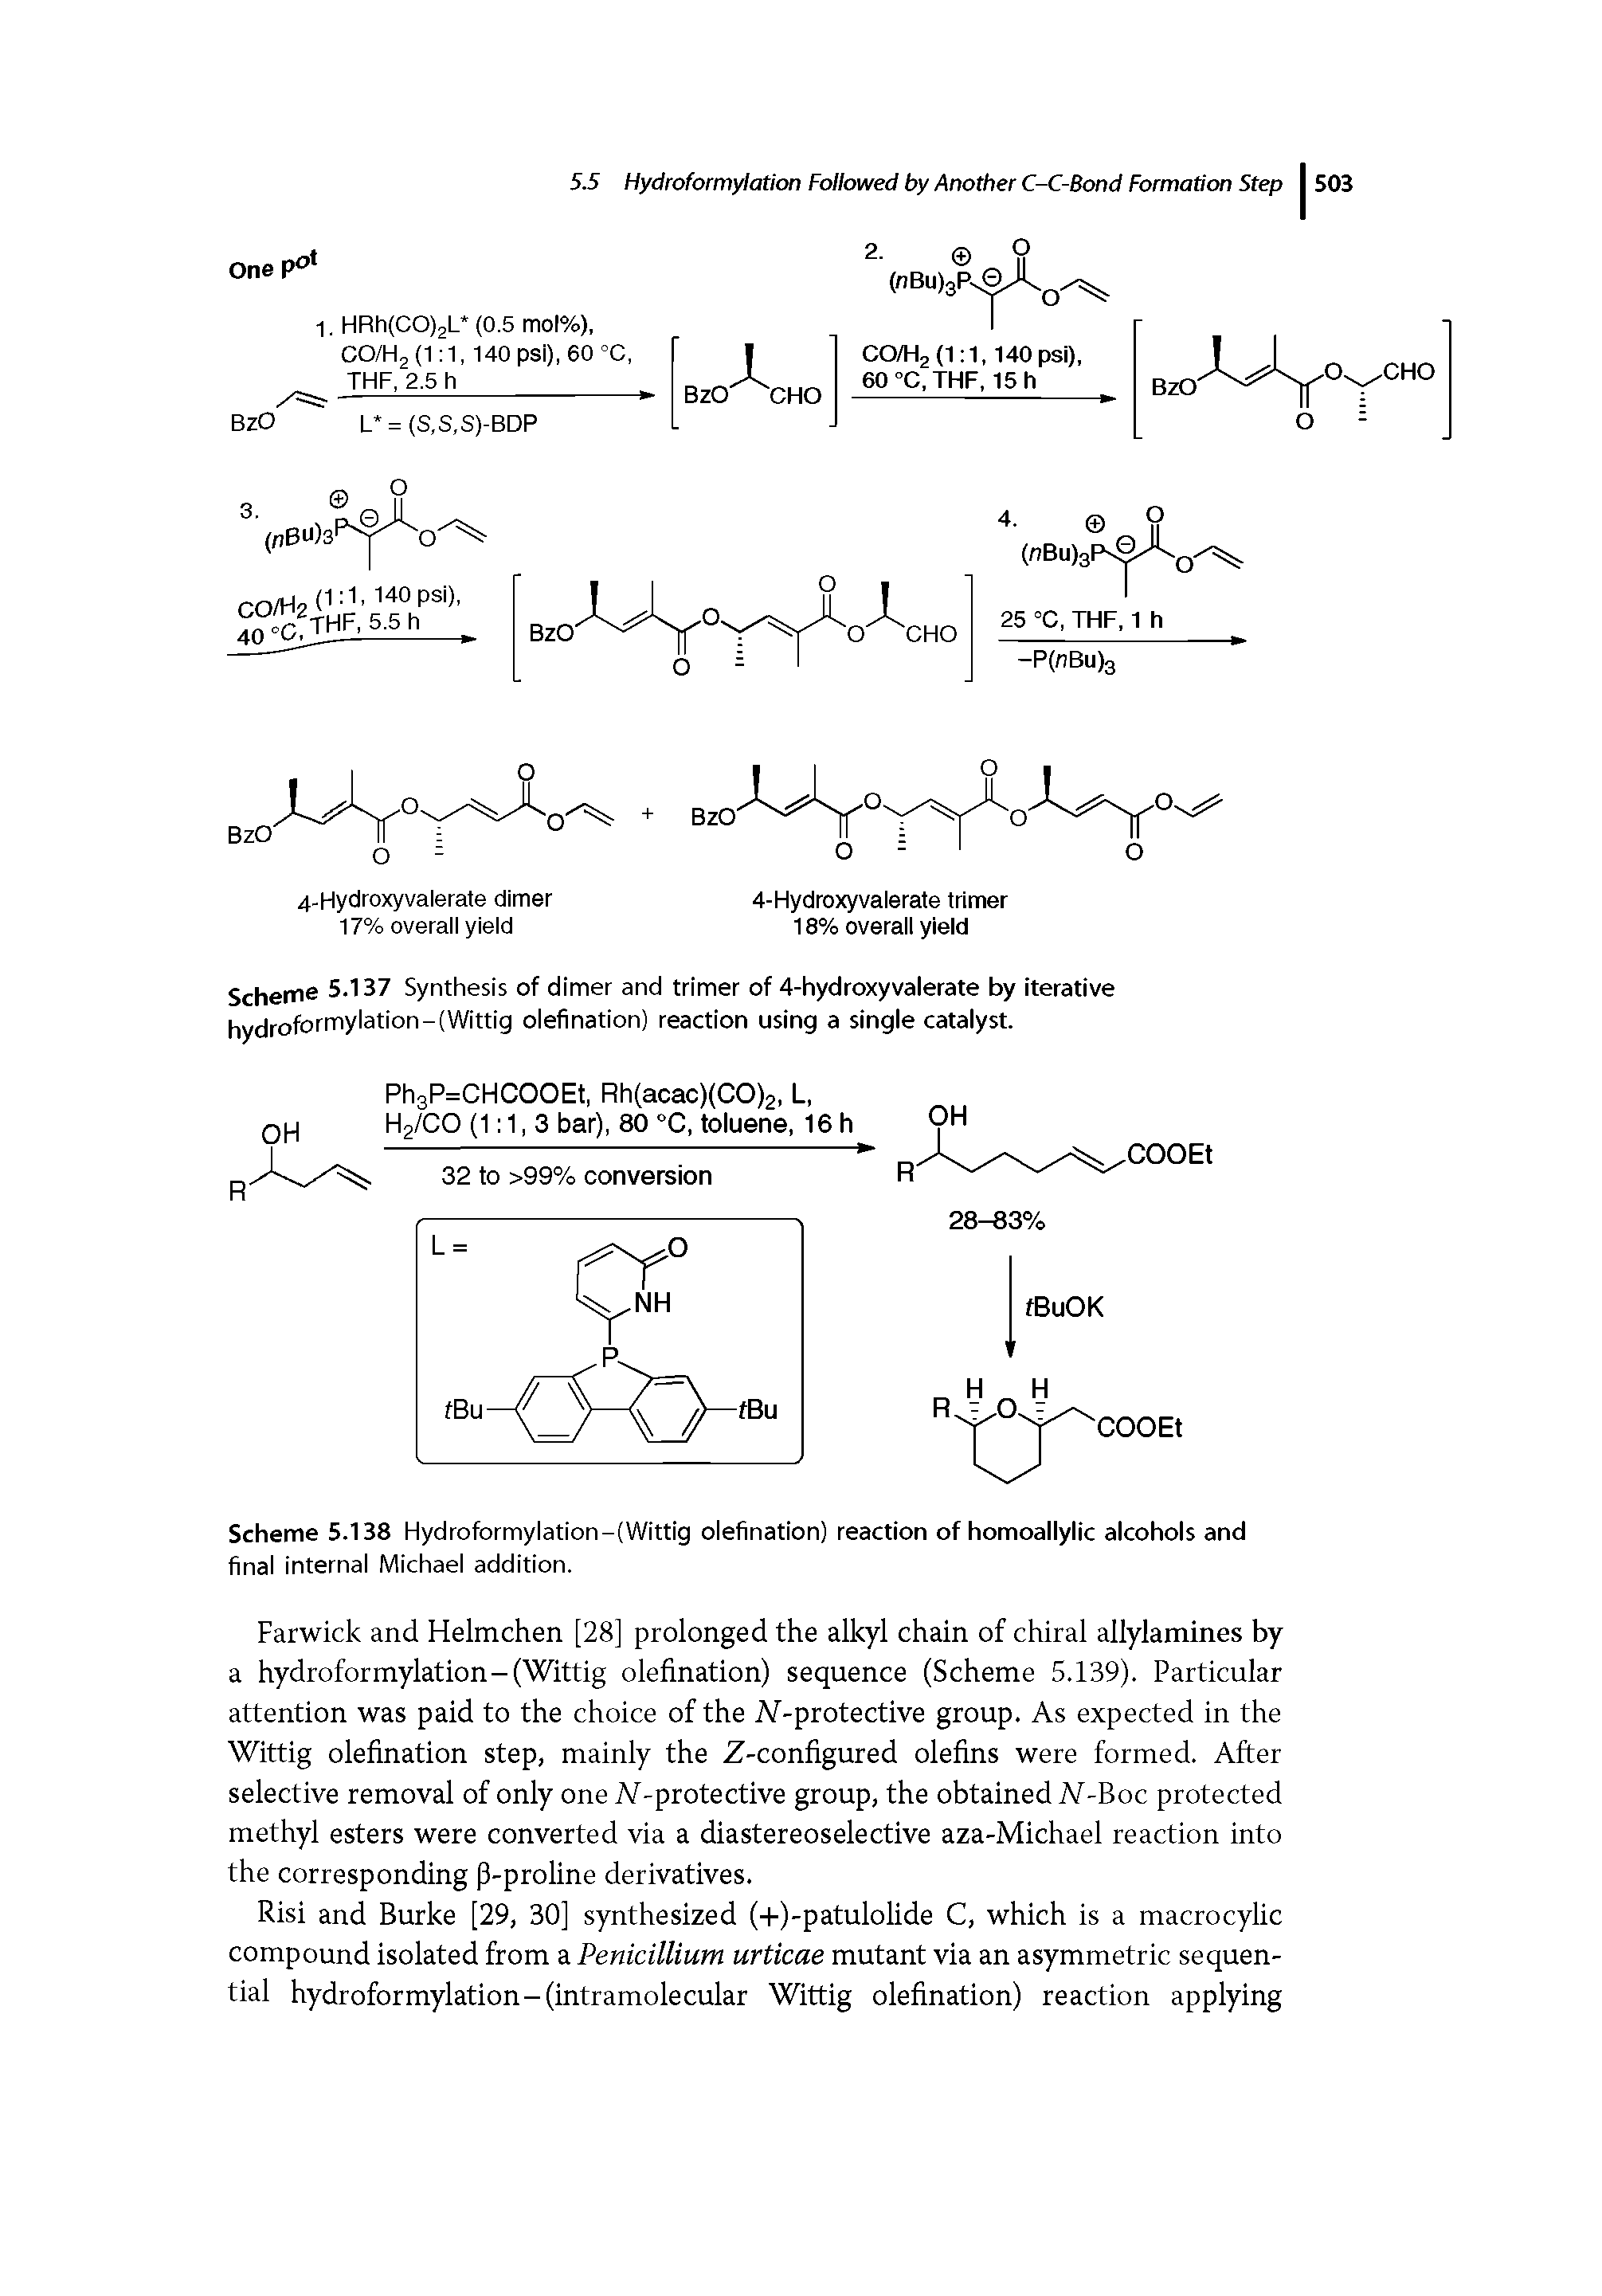 Scheme 5.137 Synthesis of dimer and trimer of 4-hydroxyvalerate by iterative hydroformylation-(Wittig olefination) reaction using a single catalyst.